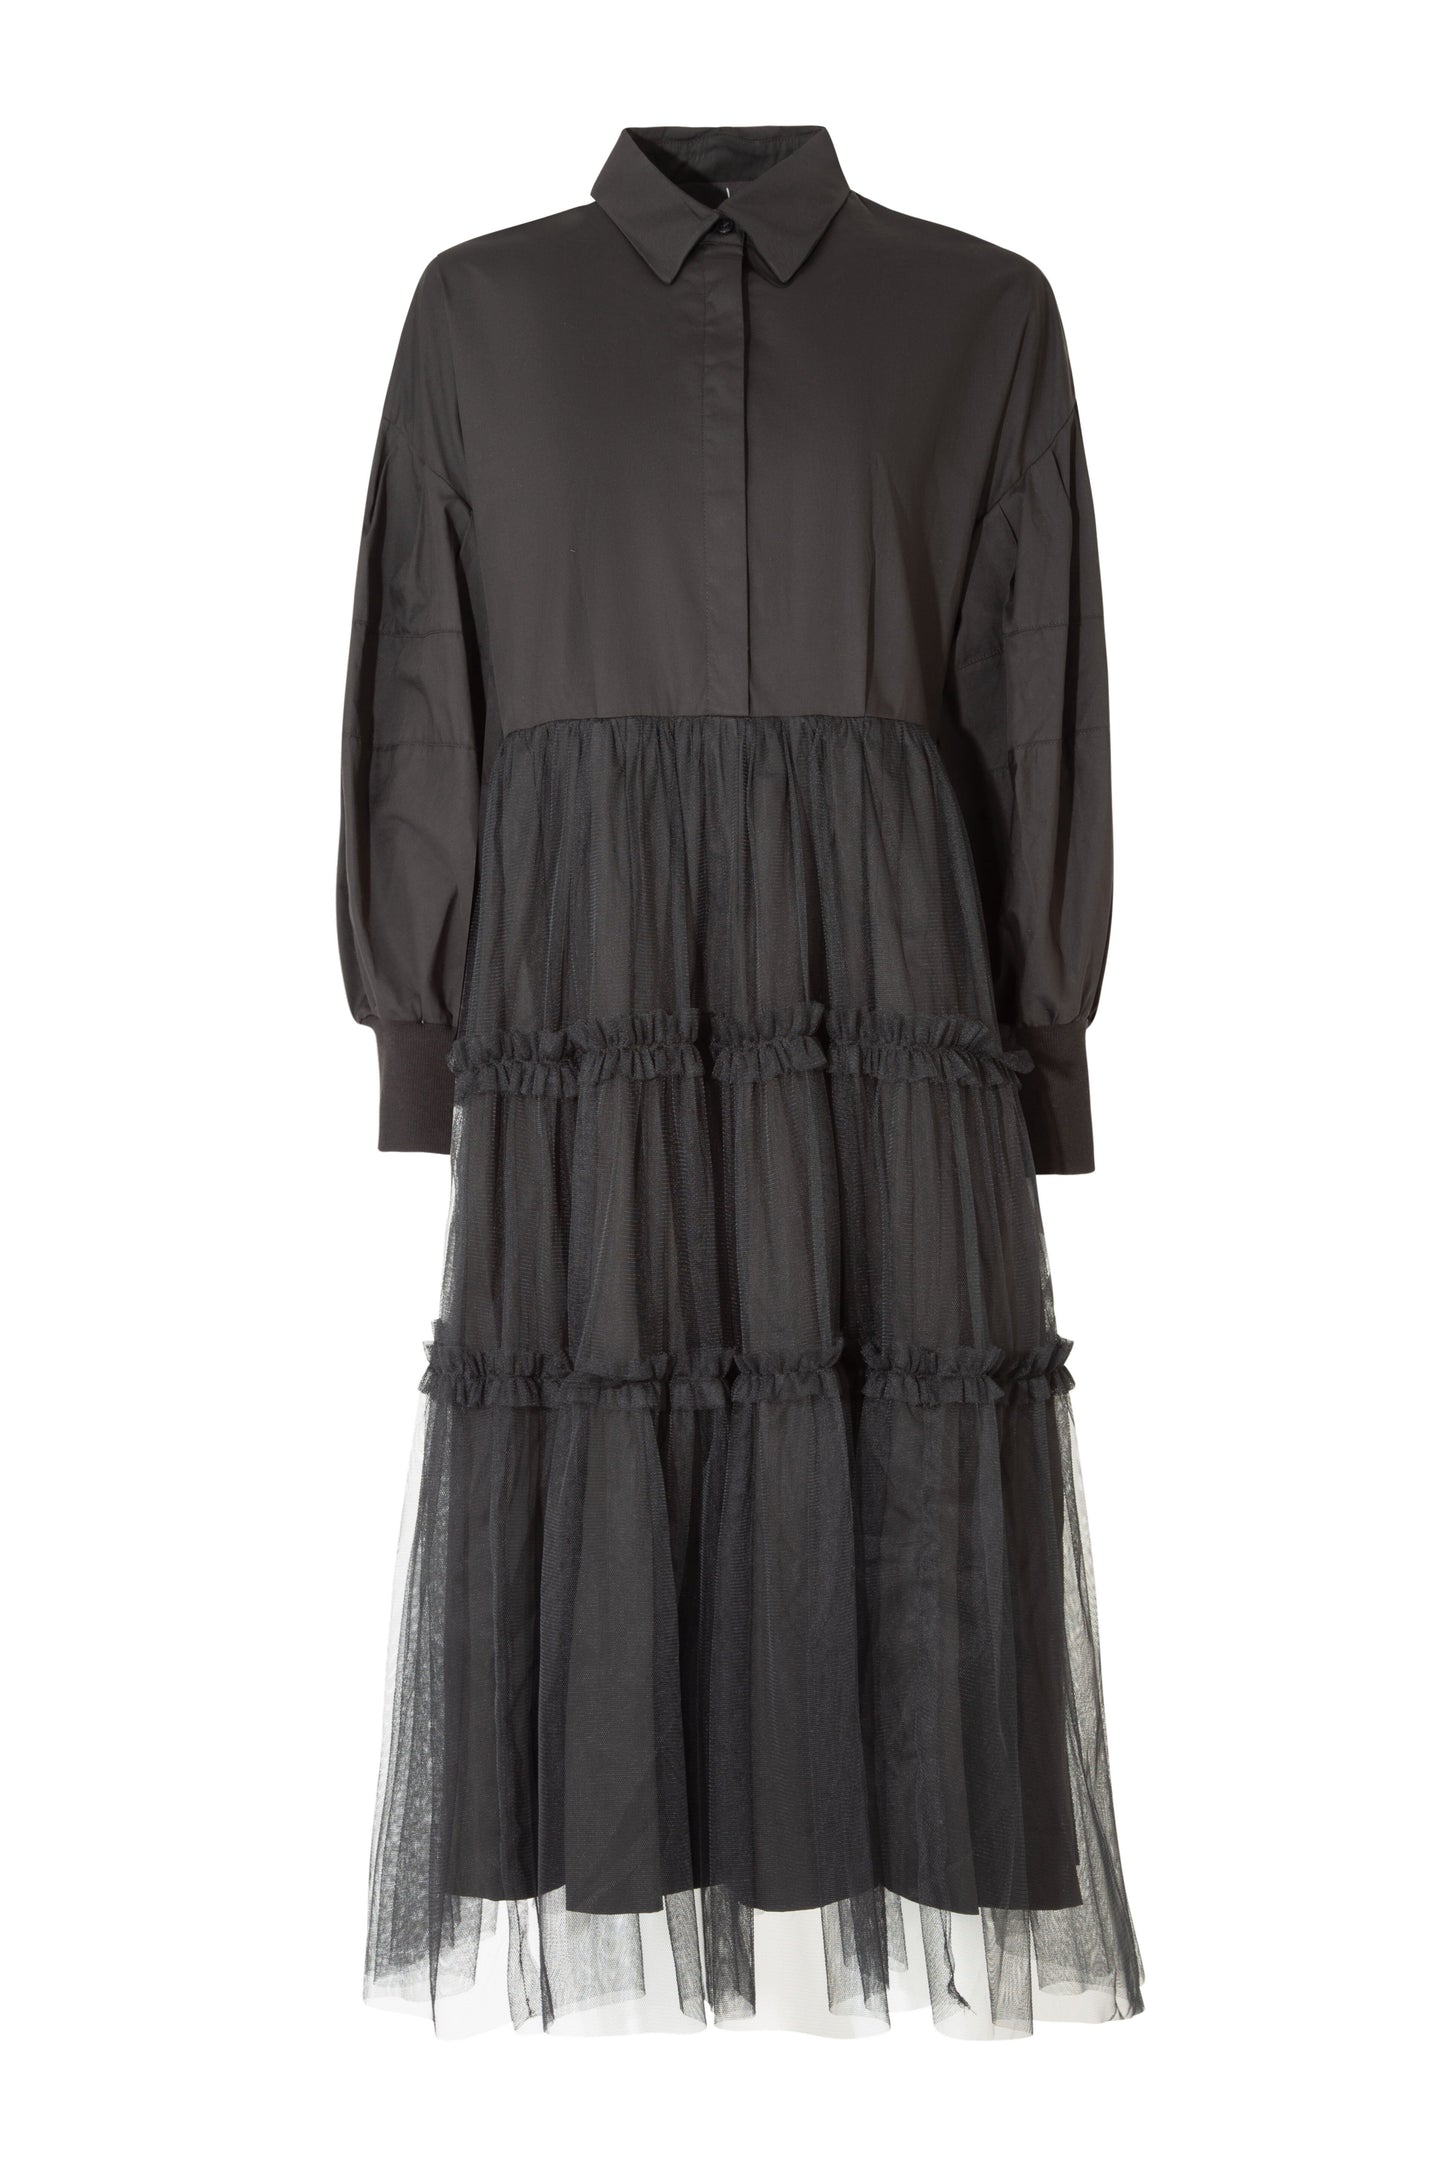 CURATE CRACK A STYLE DRESS - BLACK - THE VOGUE STORE